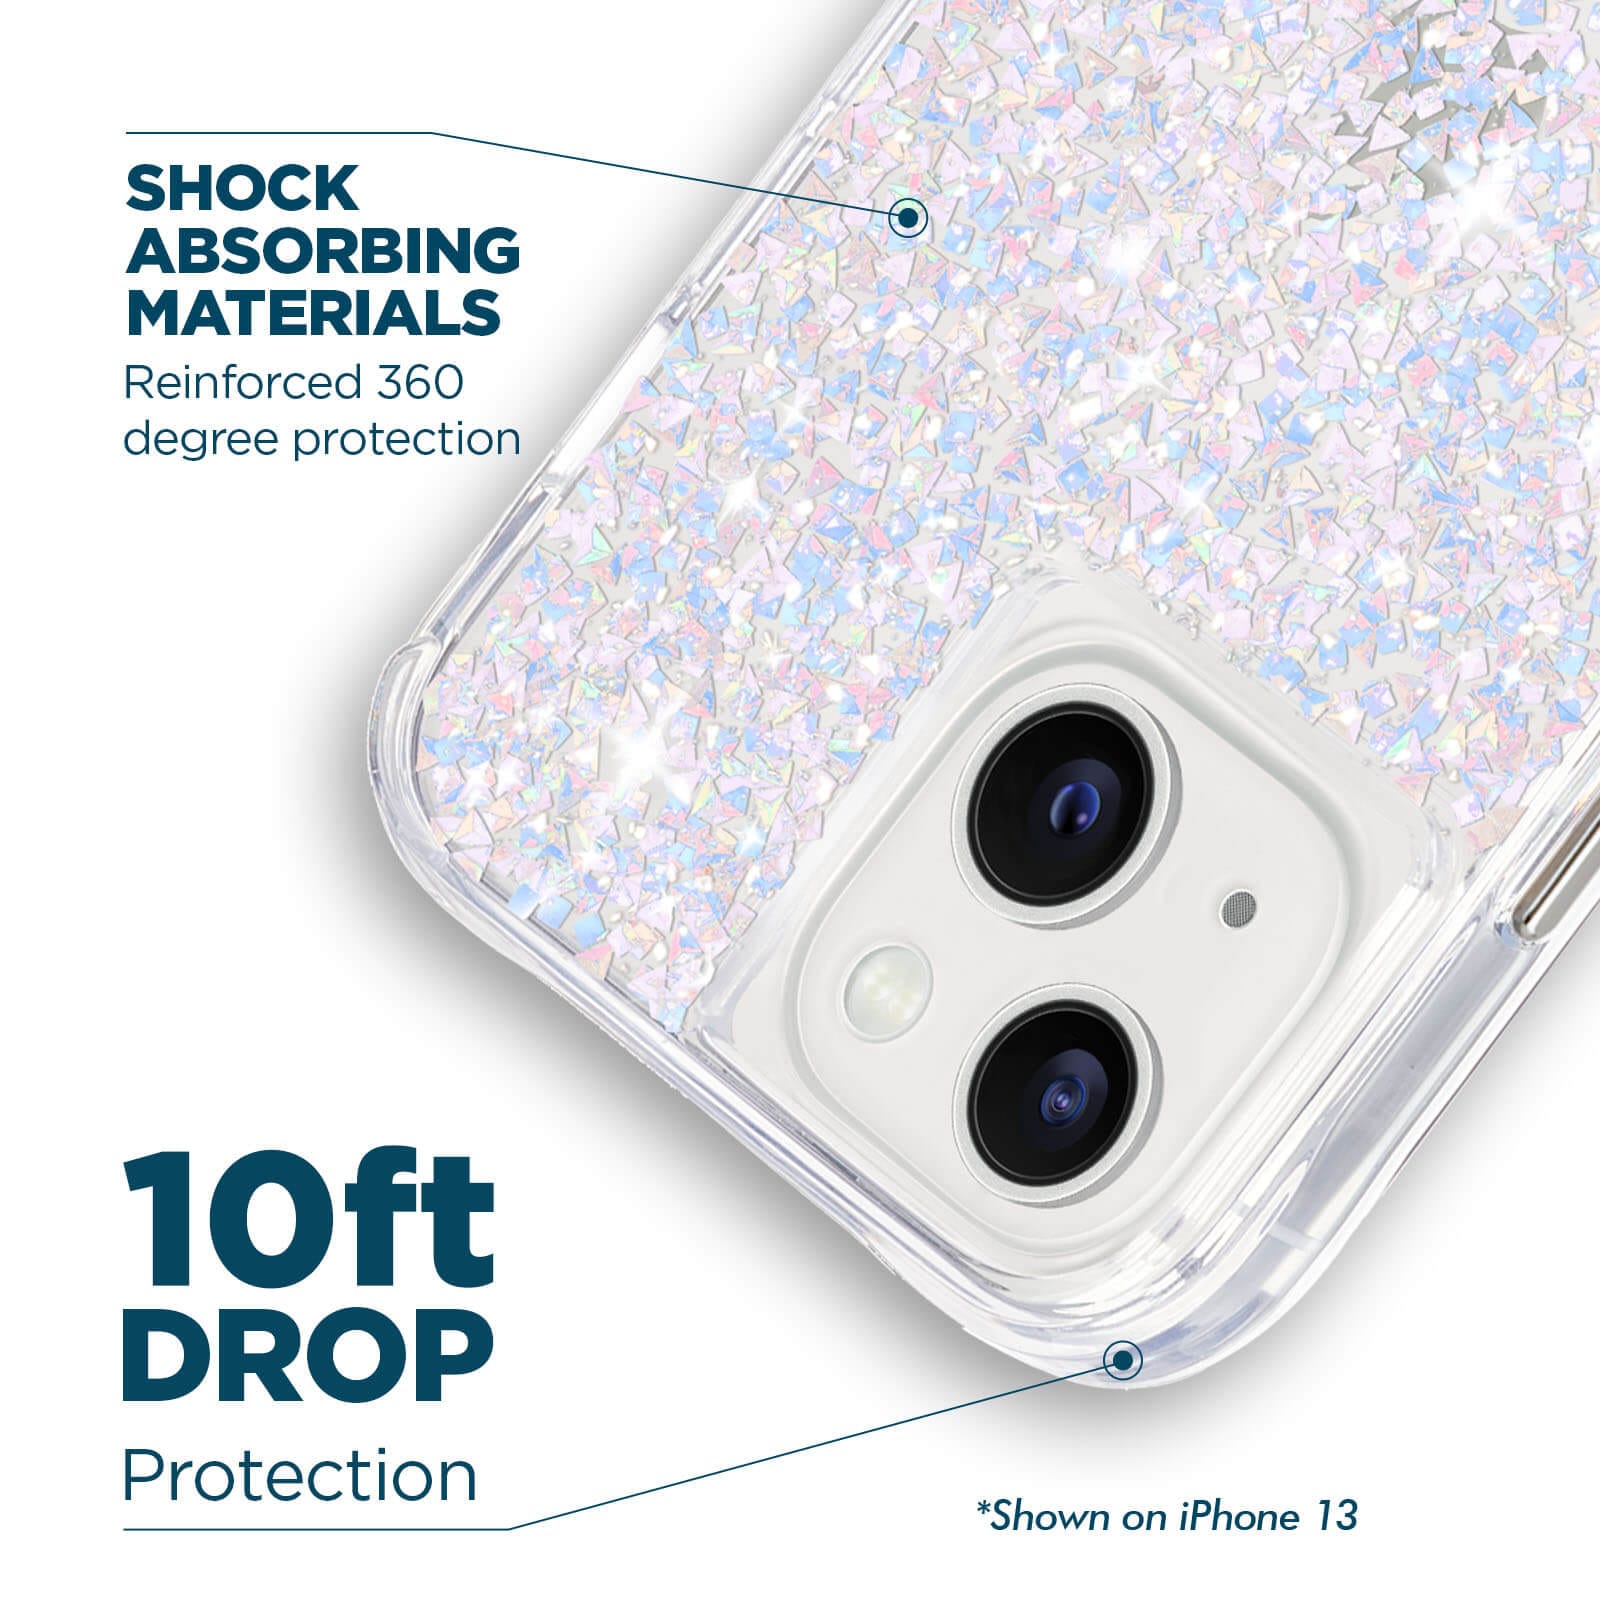 Diamond Camera Lens Protector, Diamond Tempered Glass Camera Cover Screen  Protector for iPhone 14 / iPhone 14 Plus In Silver